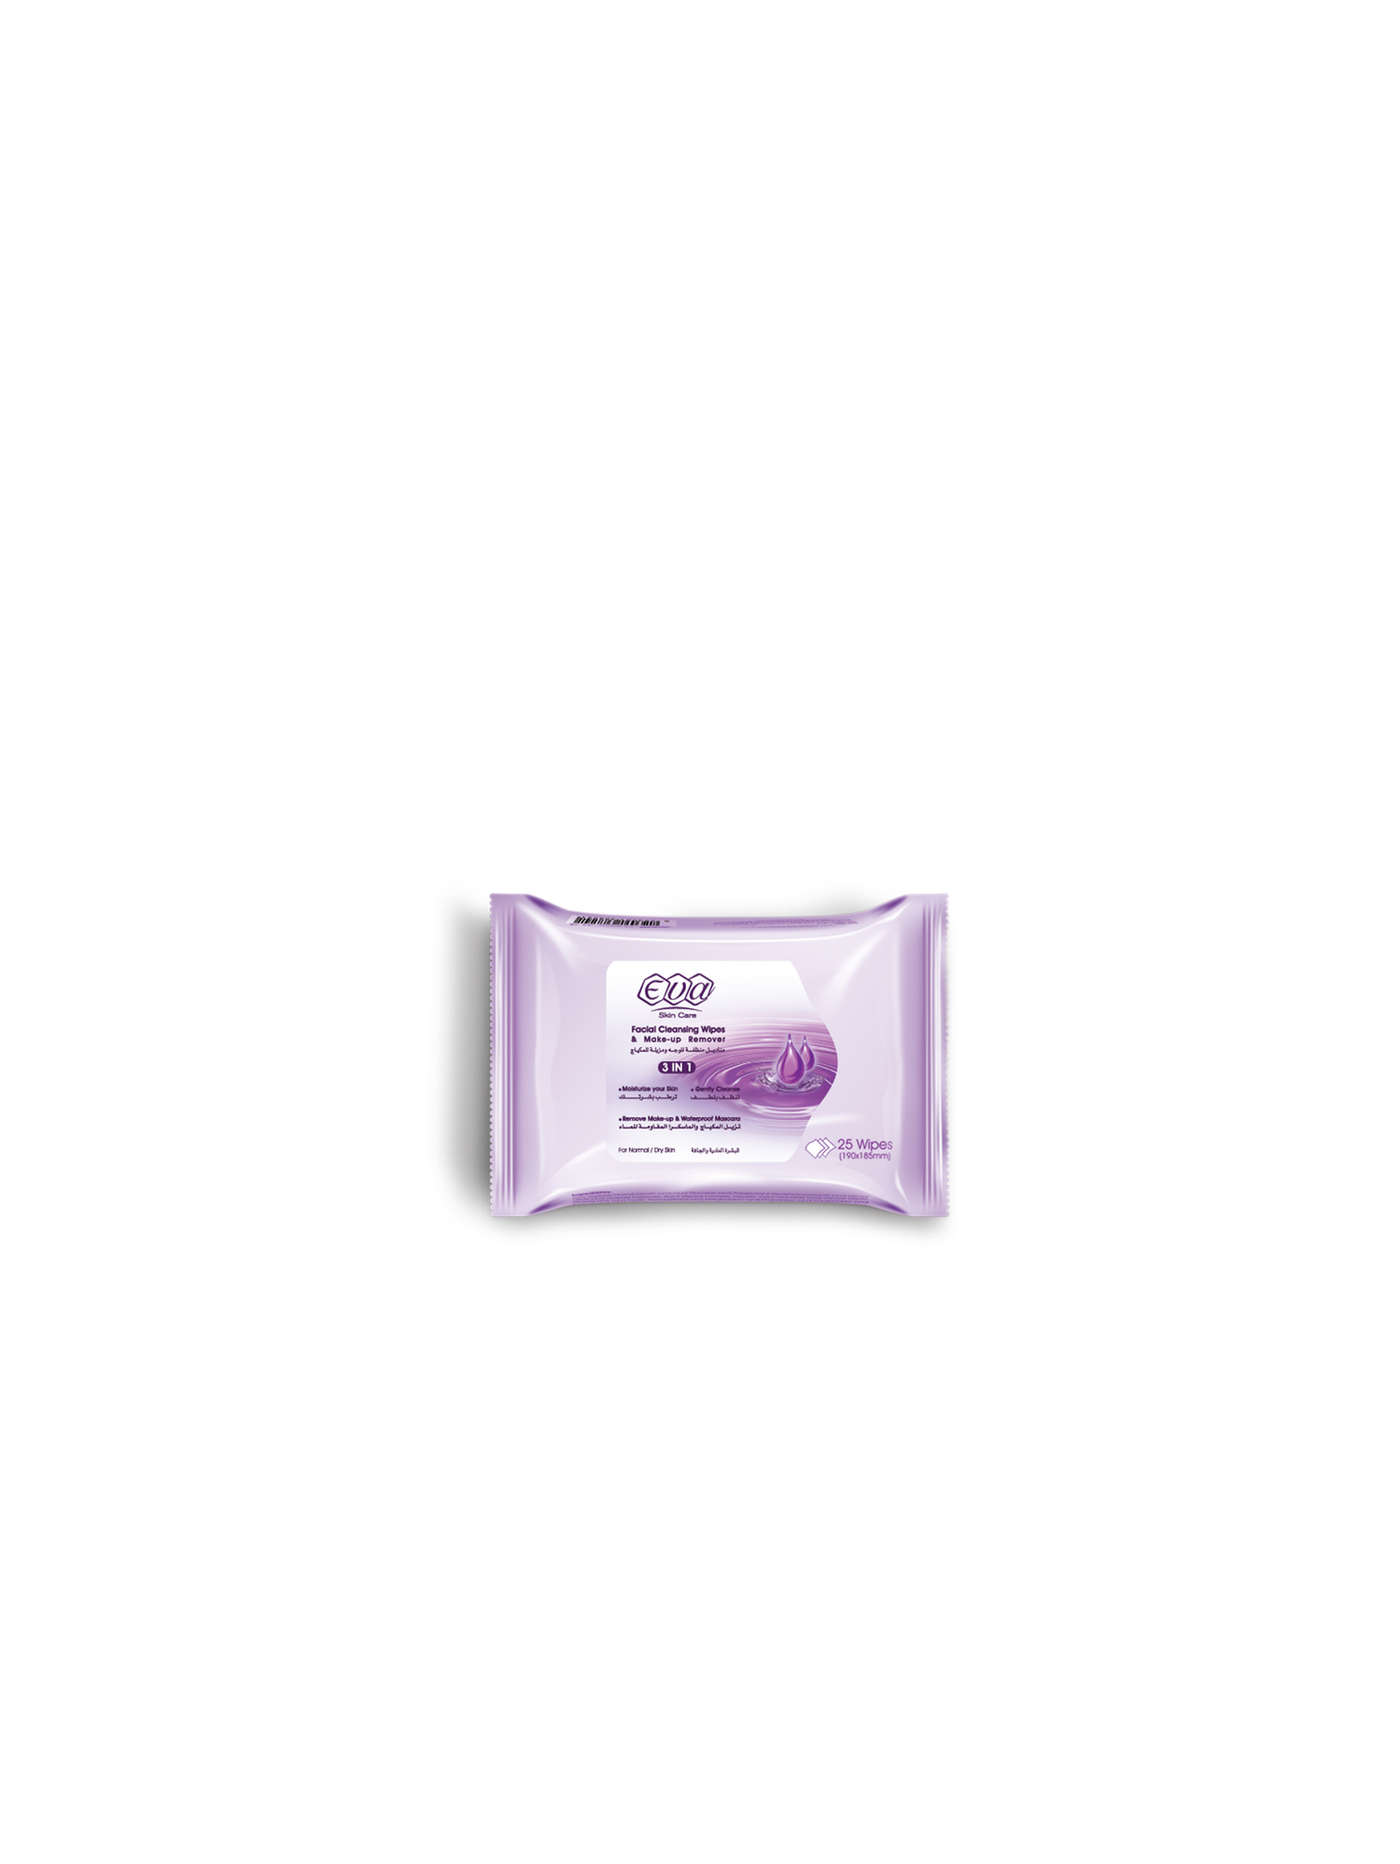 Cleansing and Make-up Removing Facial Wipes With Glycerin For Normal/Dry Skin: 25 wipes per pack-